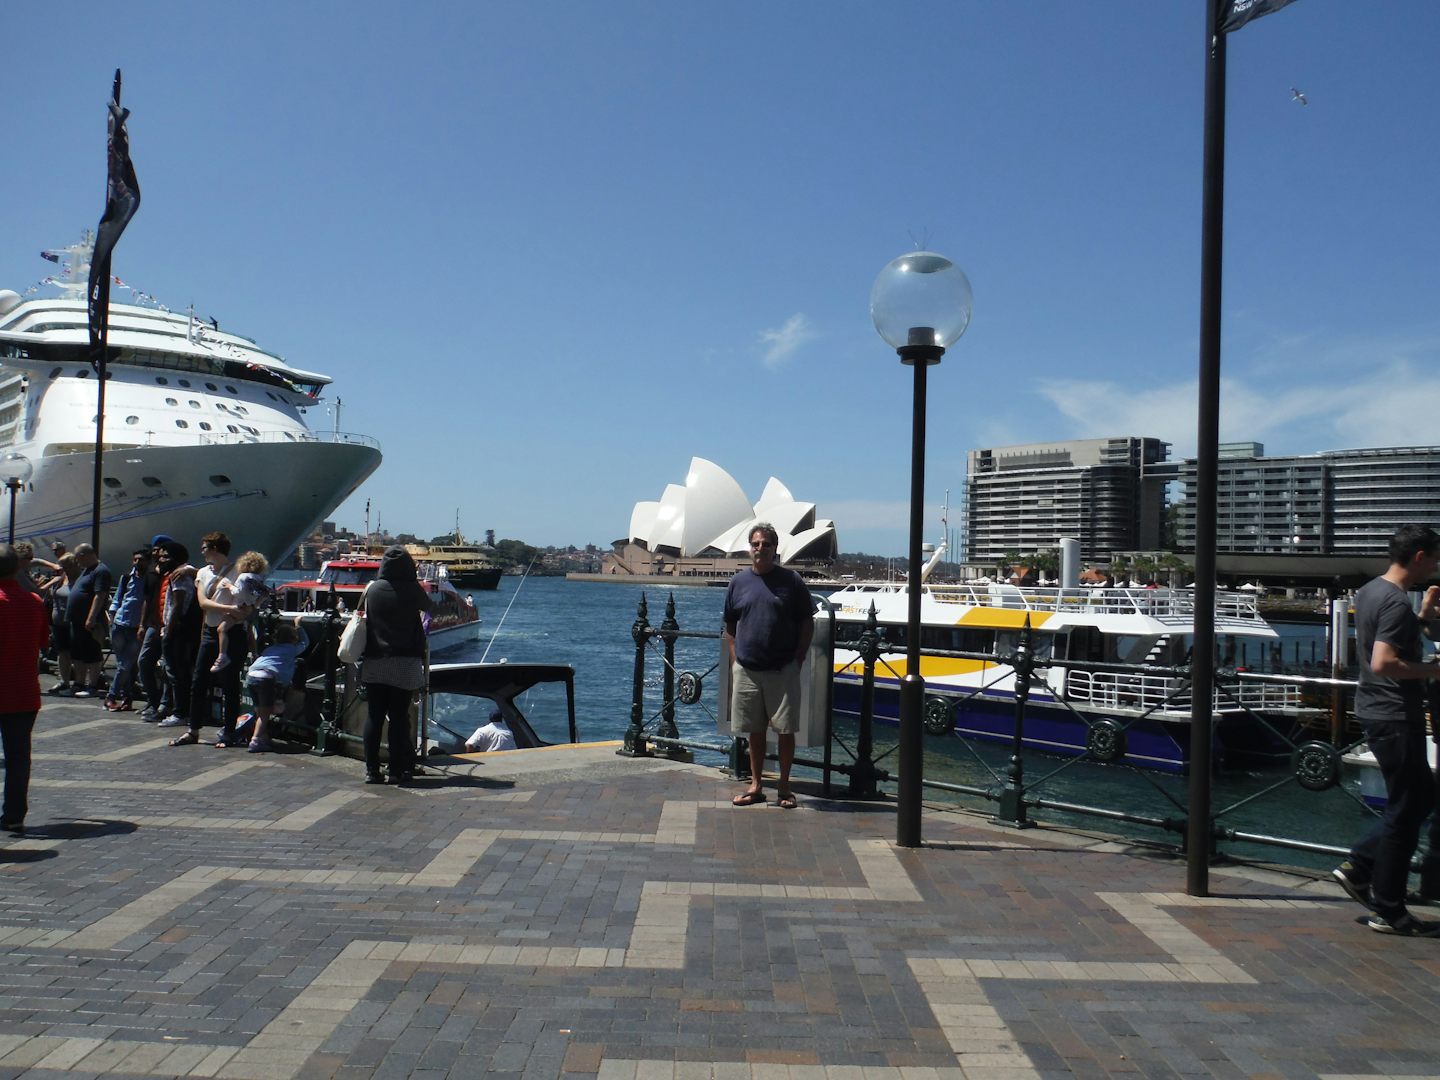 The famous Sydney Opera House and Harbor in Australia!